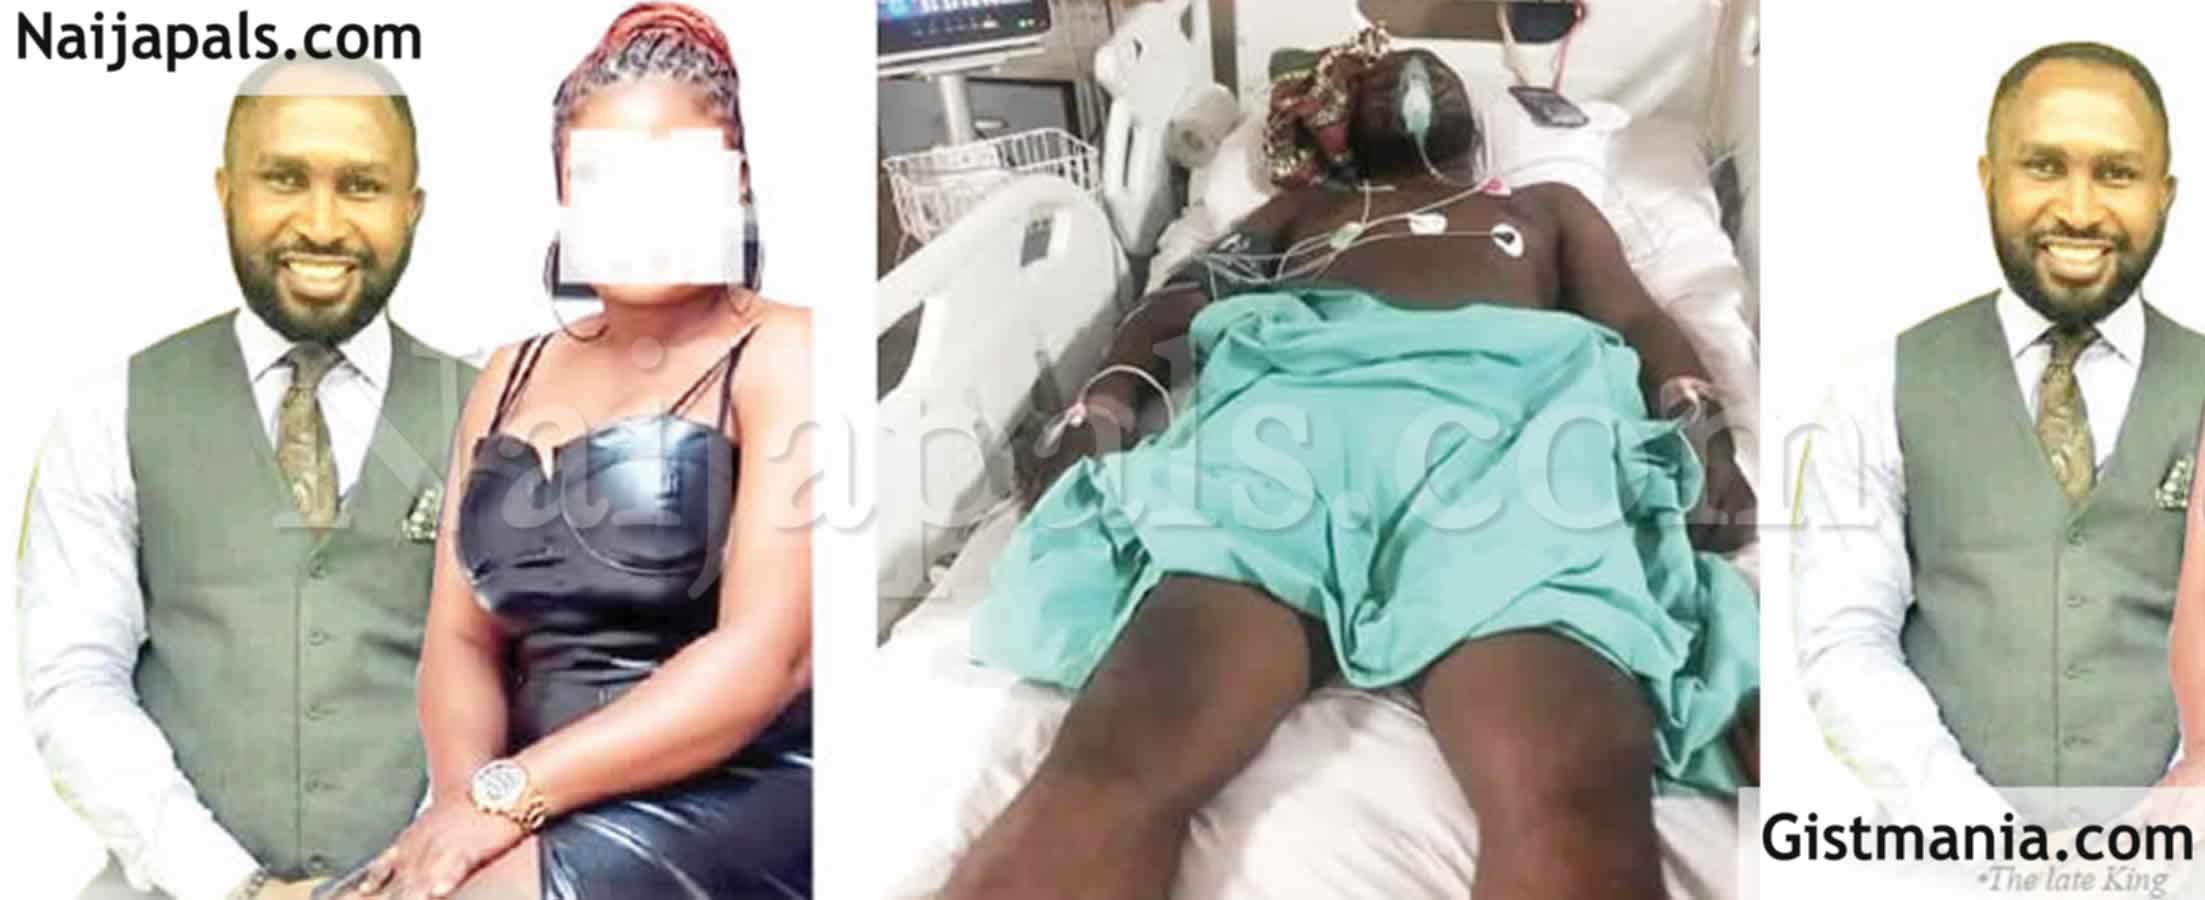 <img alt='.' class='lazyload' data-src='https://img.gistmania.com/emot/news.gif' /> <b>Akwa Ibom Man, Edwin King Dies Mysteriously After A Meal With Lover; Family Suspects Foul Play</b>